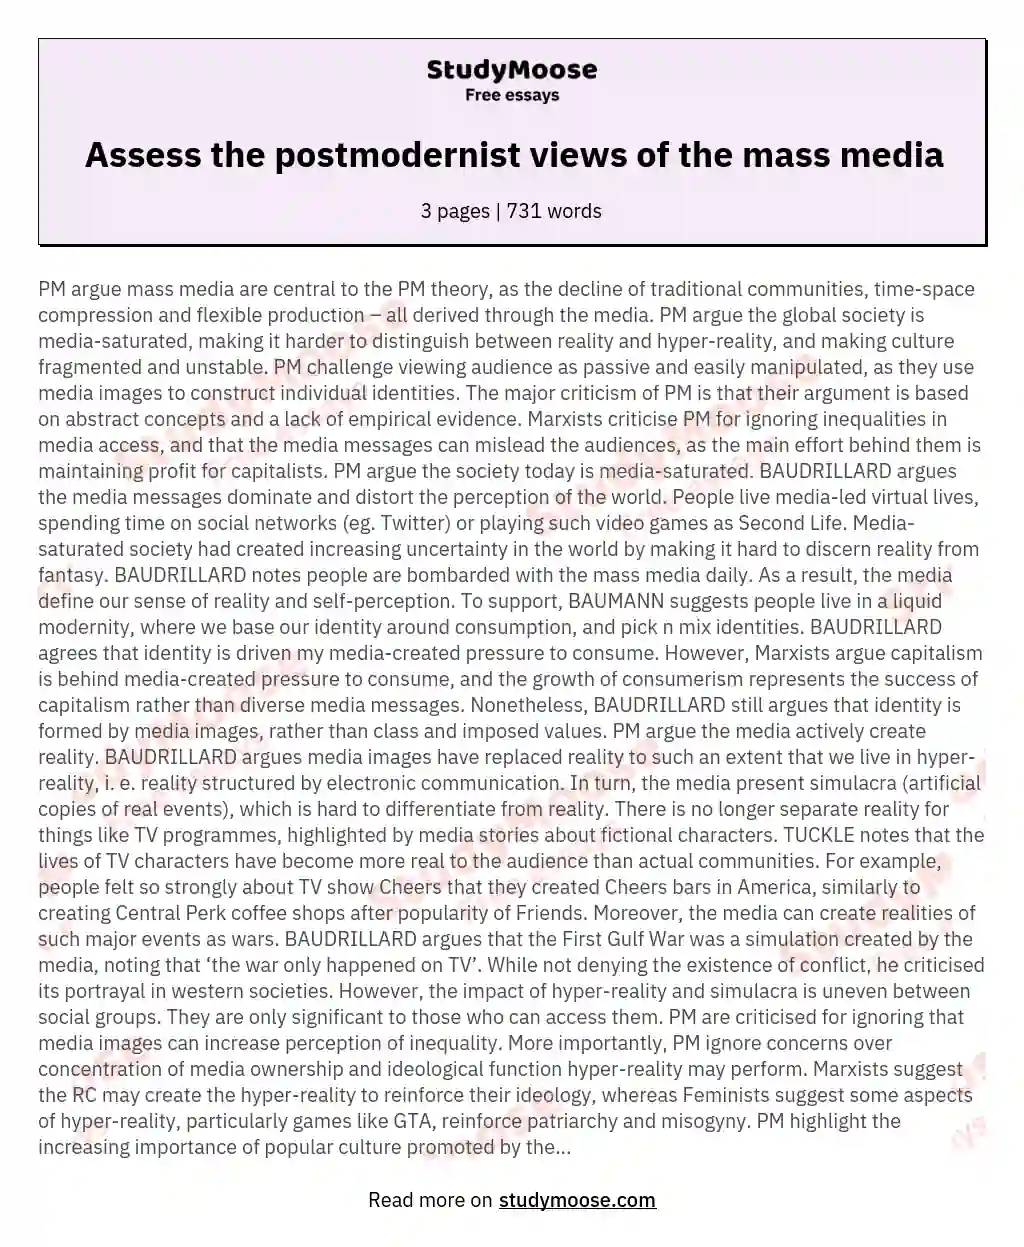 Assess the postmodernist views of the mass media essay